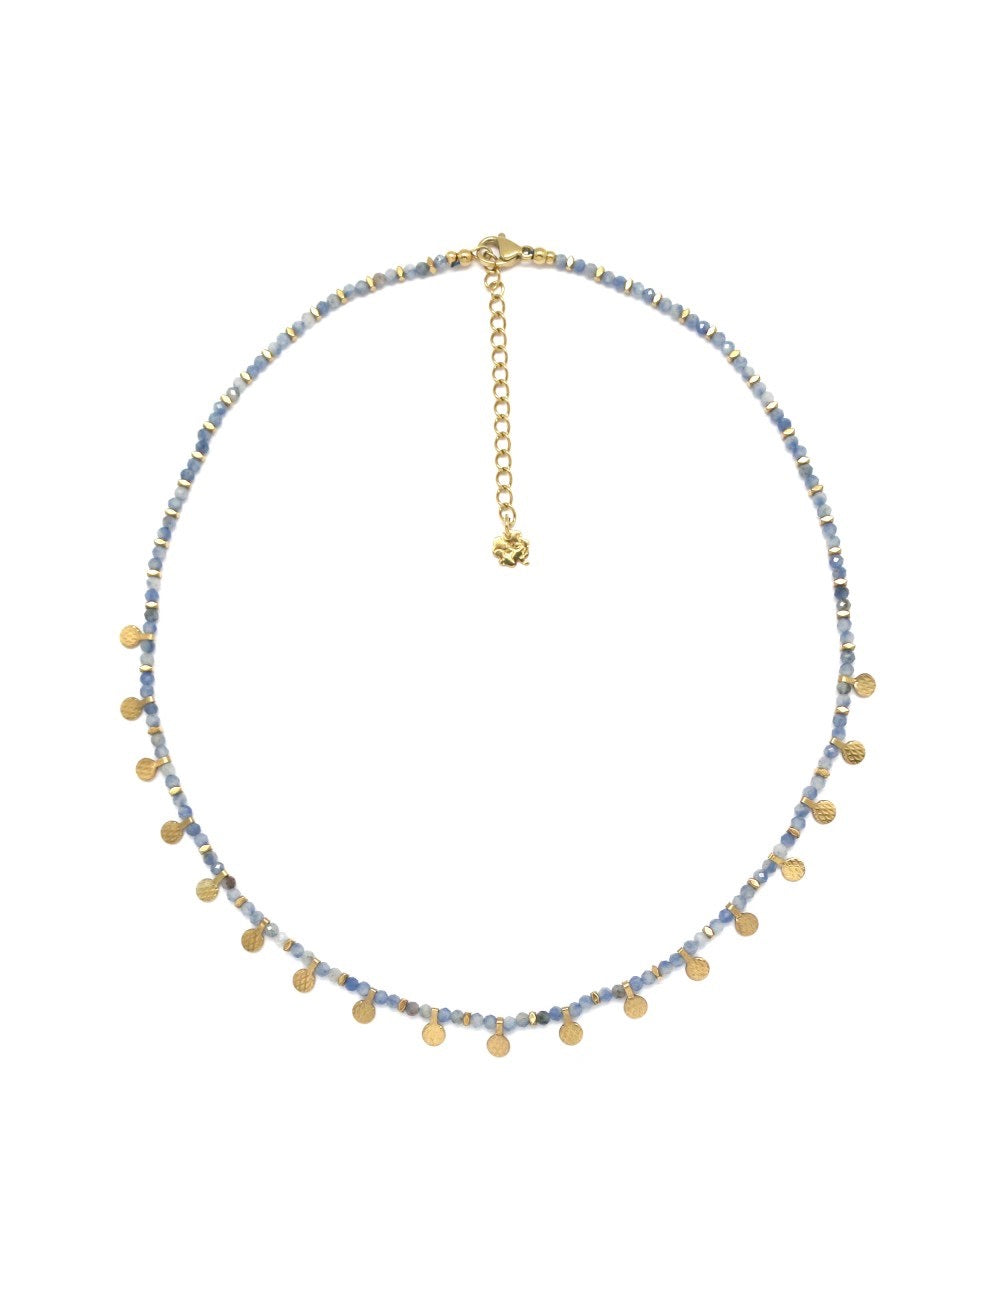 Faceted Sodalite Short Necklace with 24K Gold Plate N2-2351 -French Flair Collection-